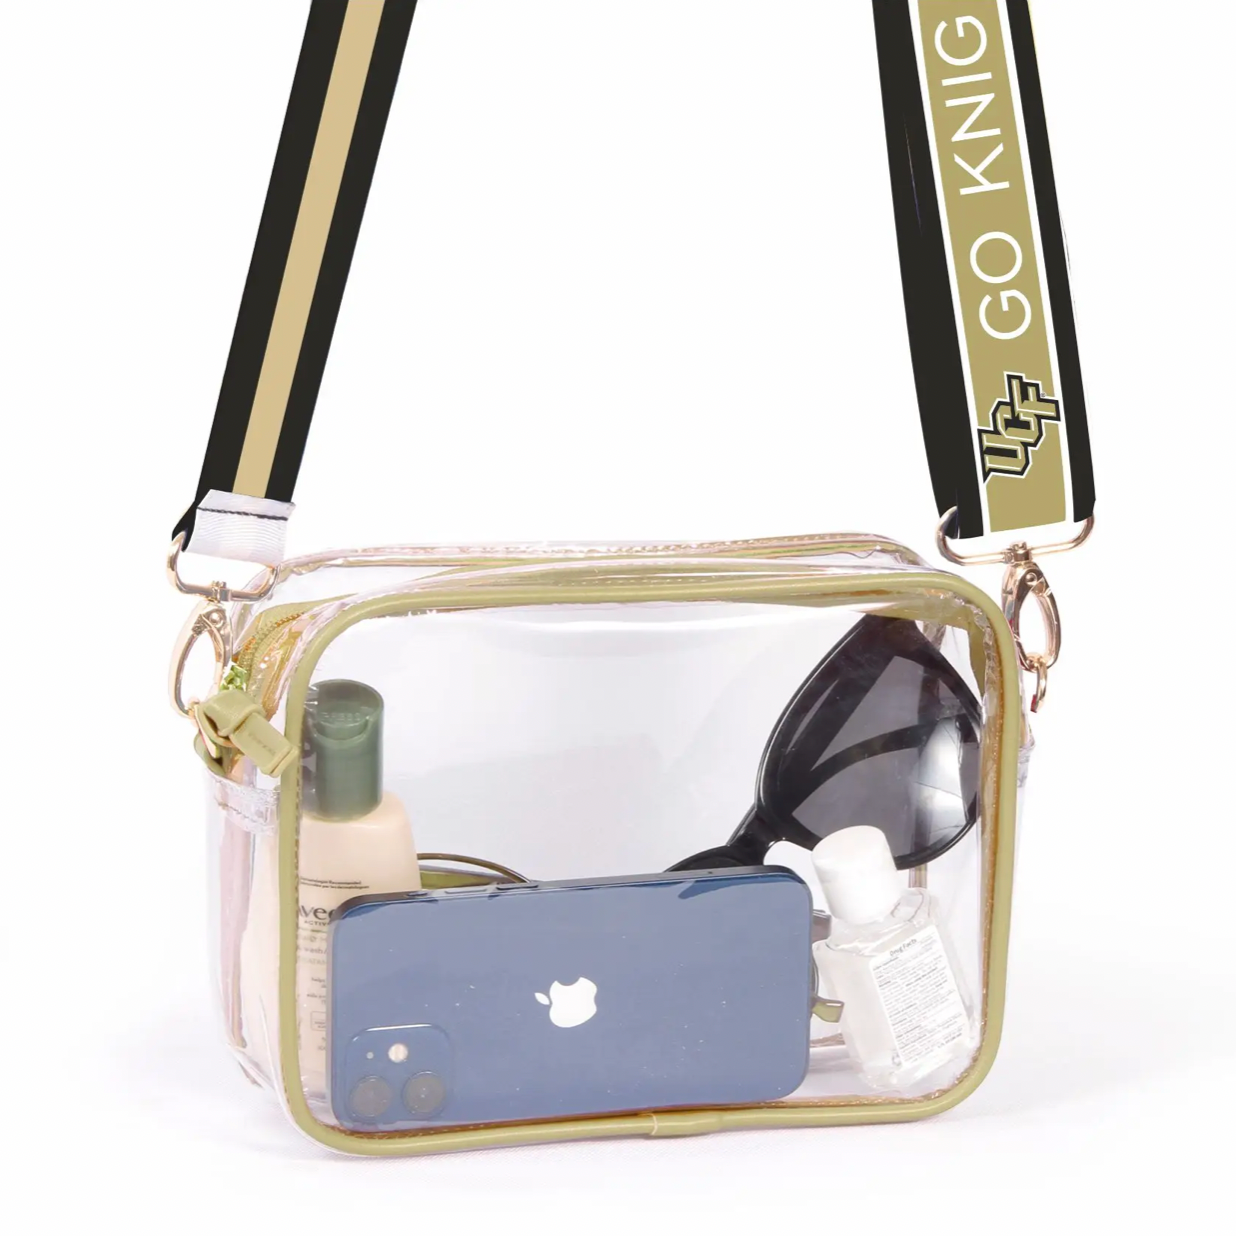 Bridget Clear Purse with Patterned Strap